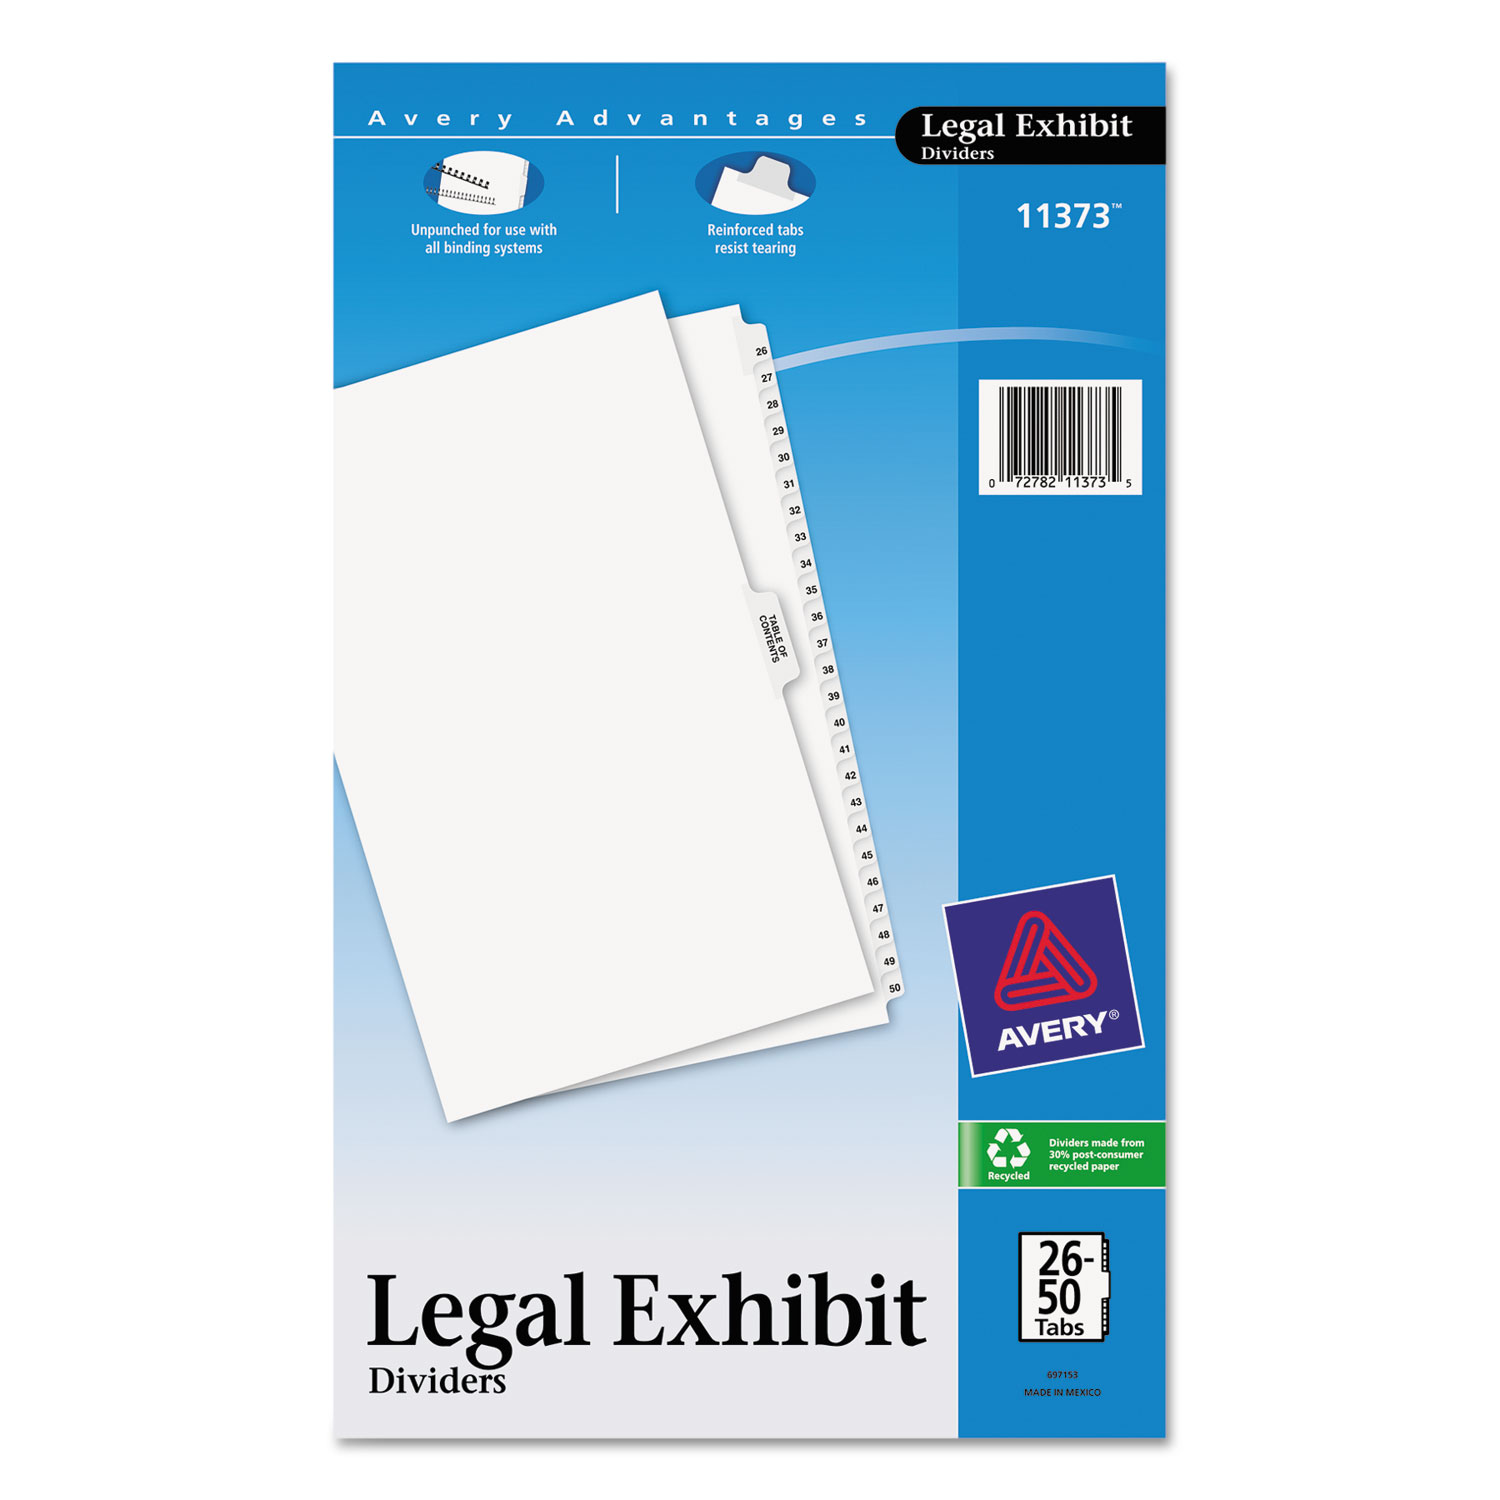  Avery 11373 Preprinted Legal Exhibit Side Tab Index Dividers, Avery Style, 26-Tab, 26 to 50, 14 x 8.5, White, 1 Set (AVE11373) 